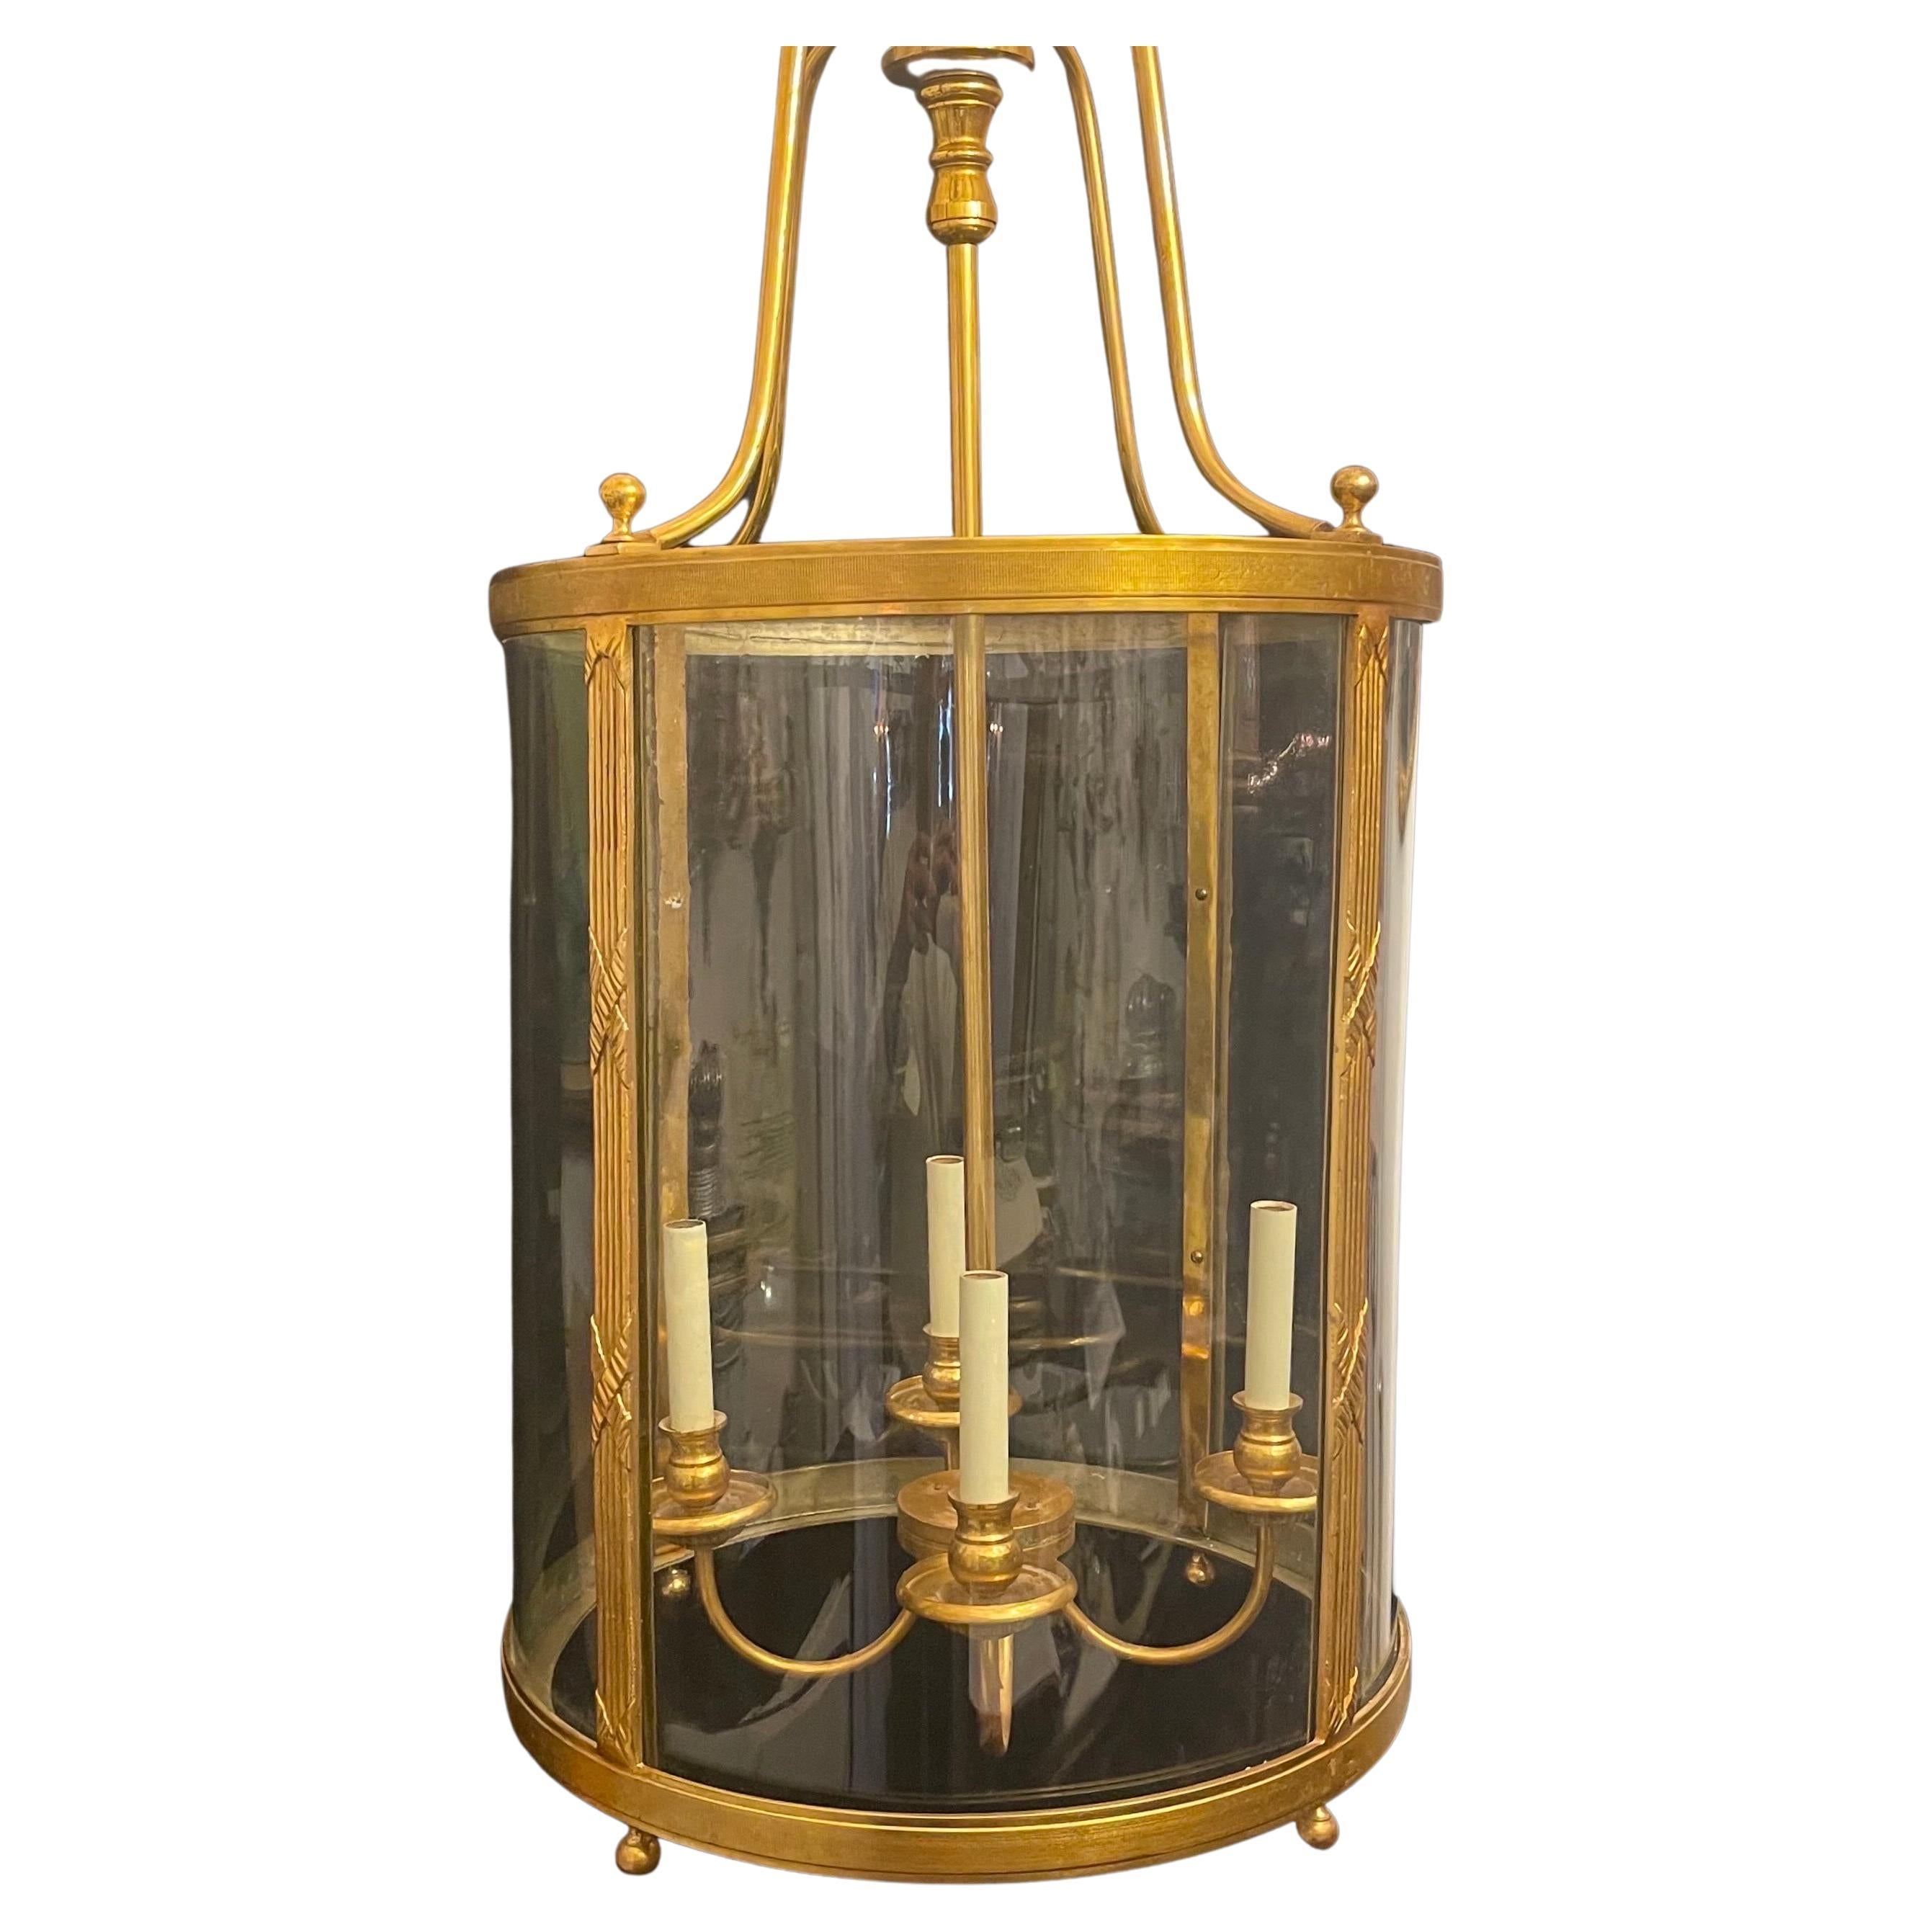 A wonderful large french bronze read & x pattern Regency / Empire style curved glass panel lantern fixture with 4 candelabra lights.